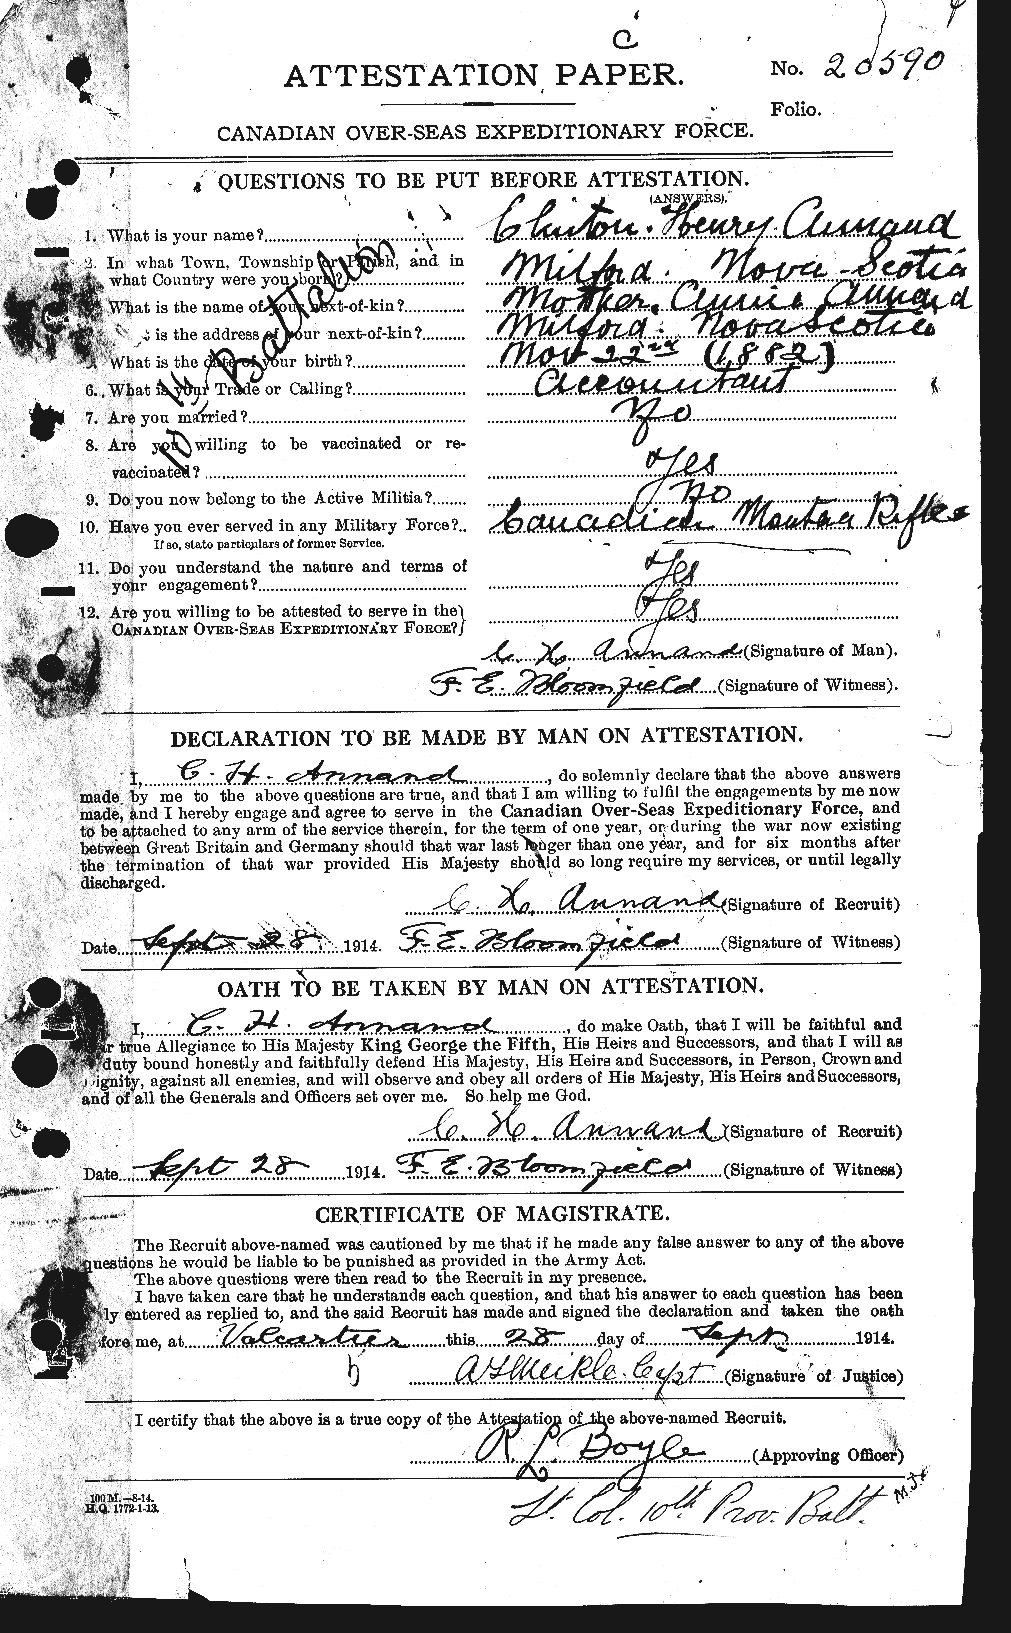 Personnel Records of the First World War - CEF 212495a